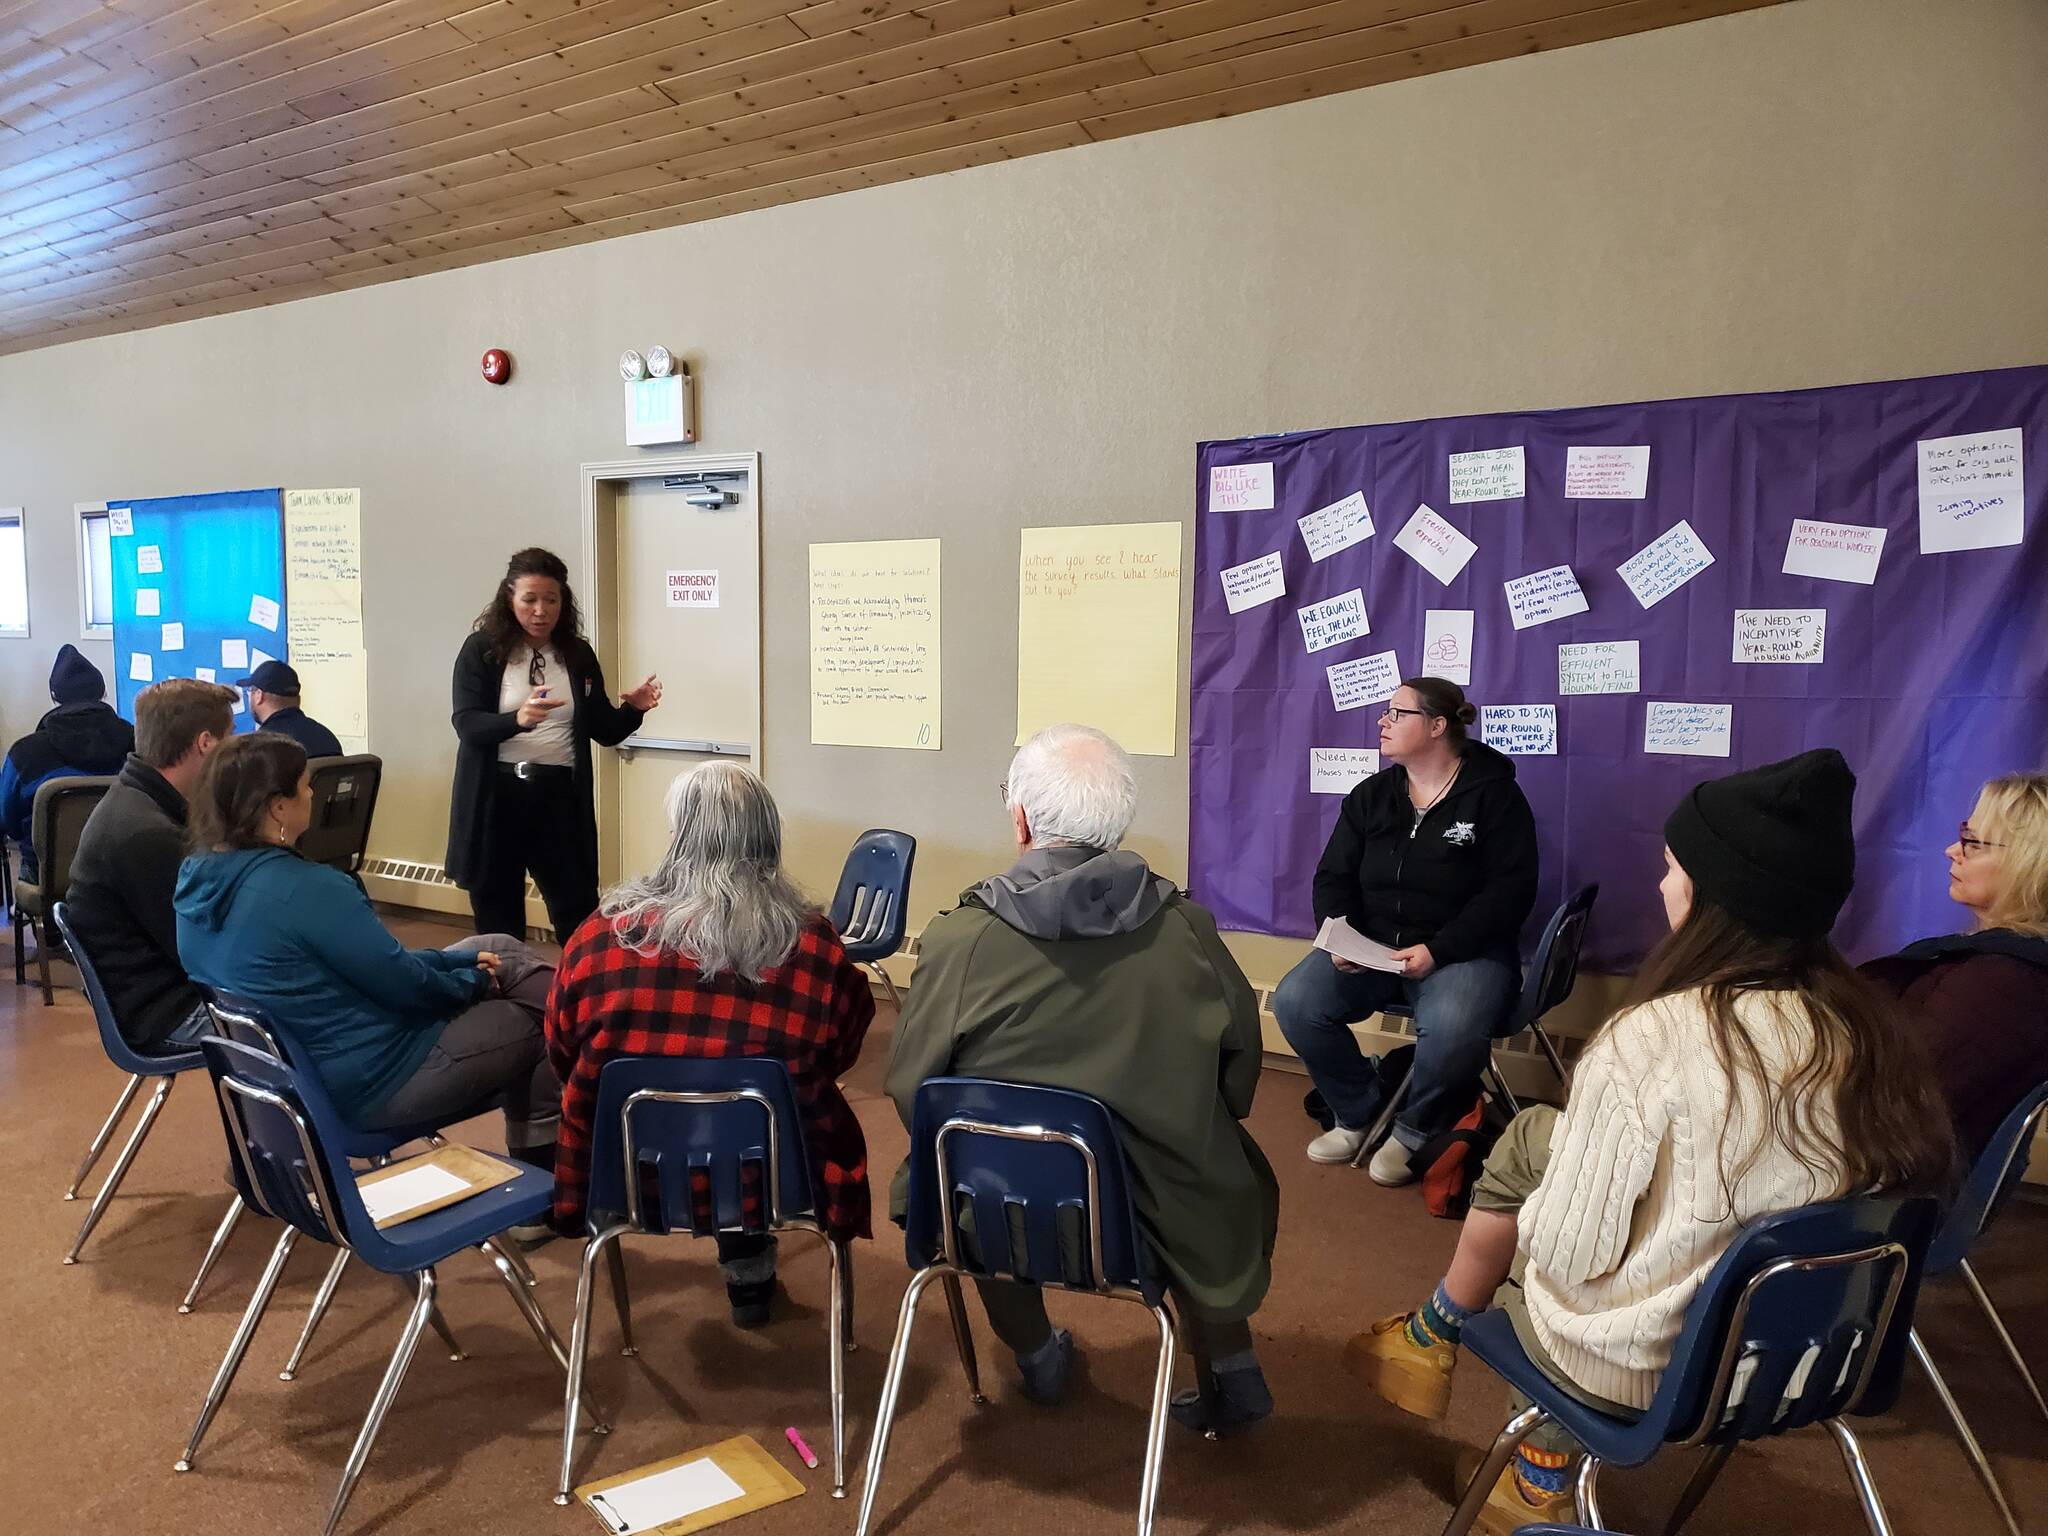 A small group discusses common themes in the ongoing housing crisis during the community conversation on housing solutions in the greater Homer area at Christian Community Church on Saturday. Photo by Delcenia Cosman